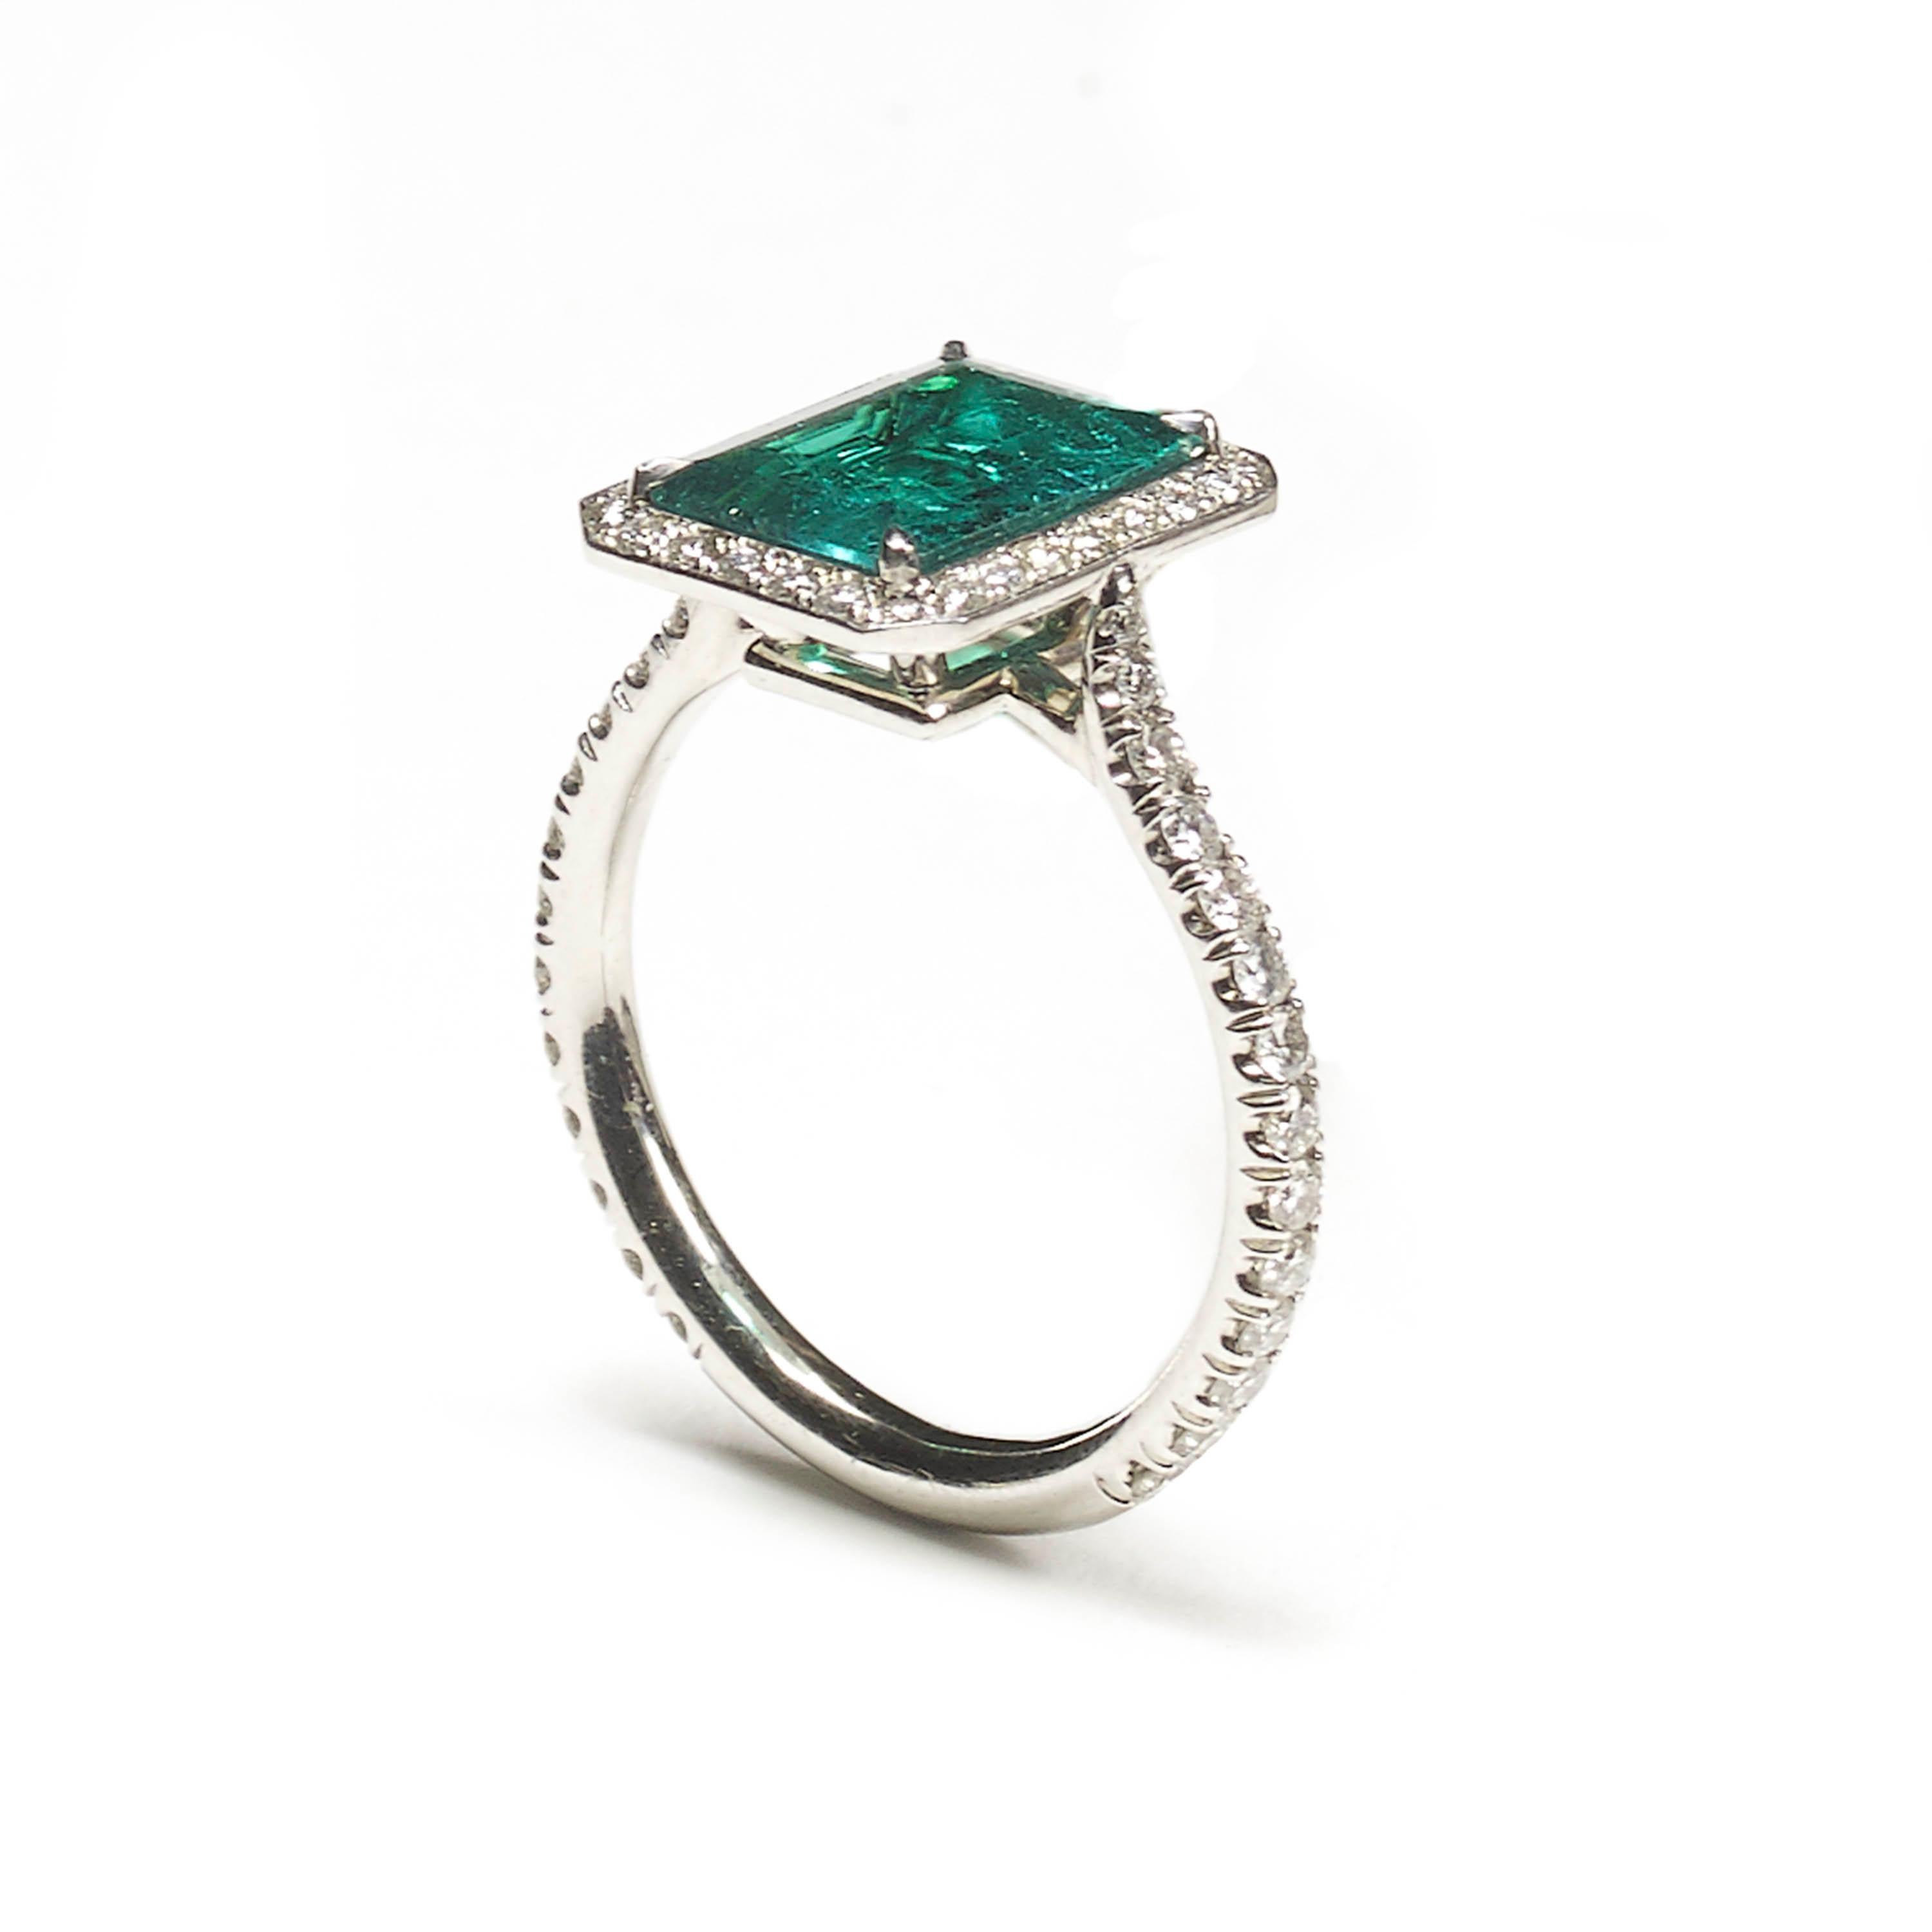 A modern emerald and diamond ring, set with an emerald-cut emerald, weighing approximately 2.03ct, in a four claw setting, with a micro pavé set surround and shoulders, mounted in 18ct white gold.
Finger size L UK / 5½ USA